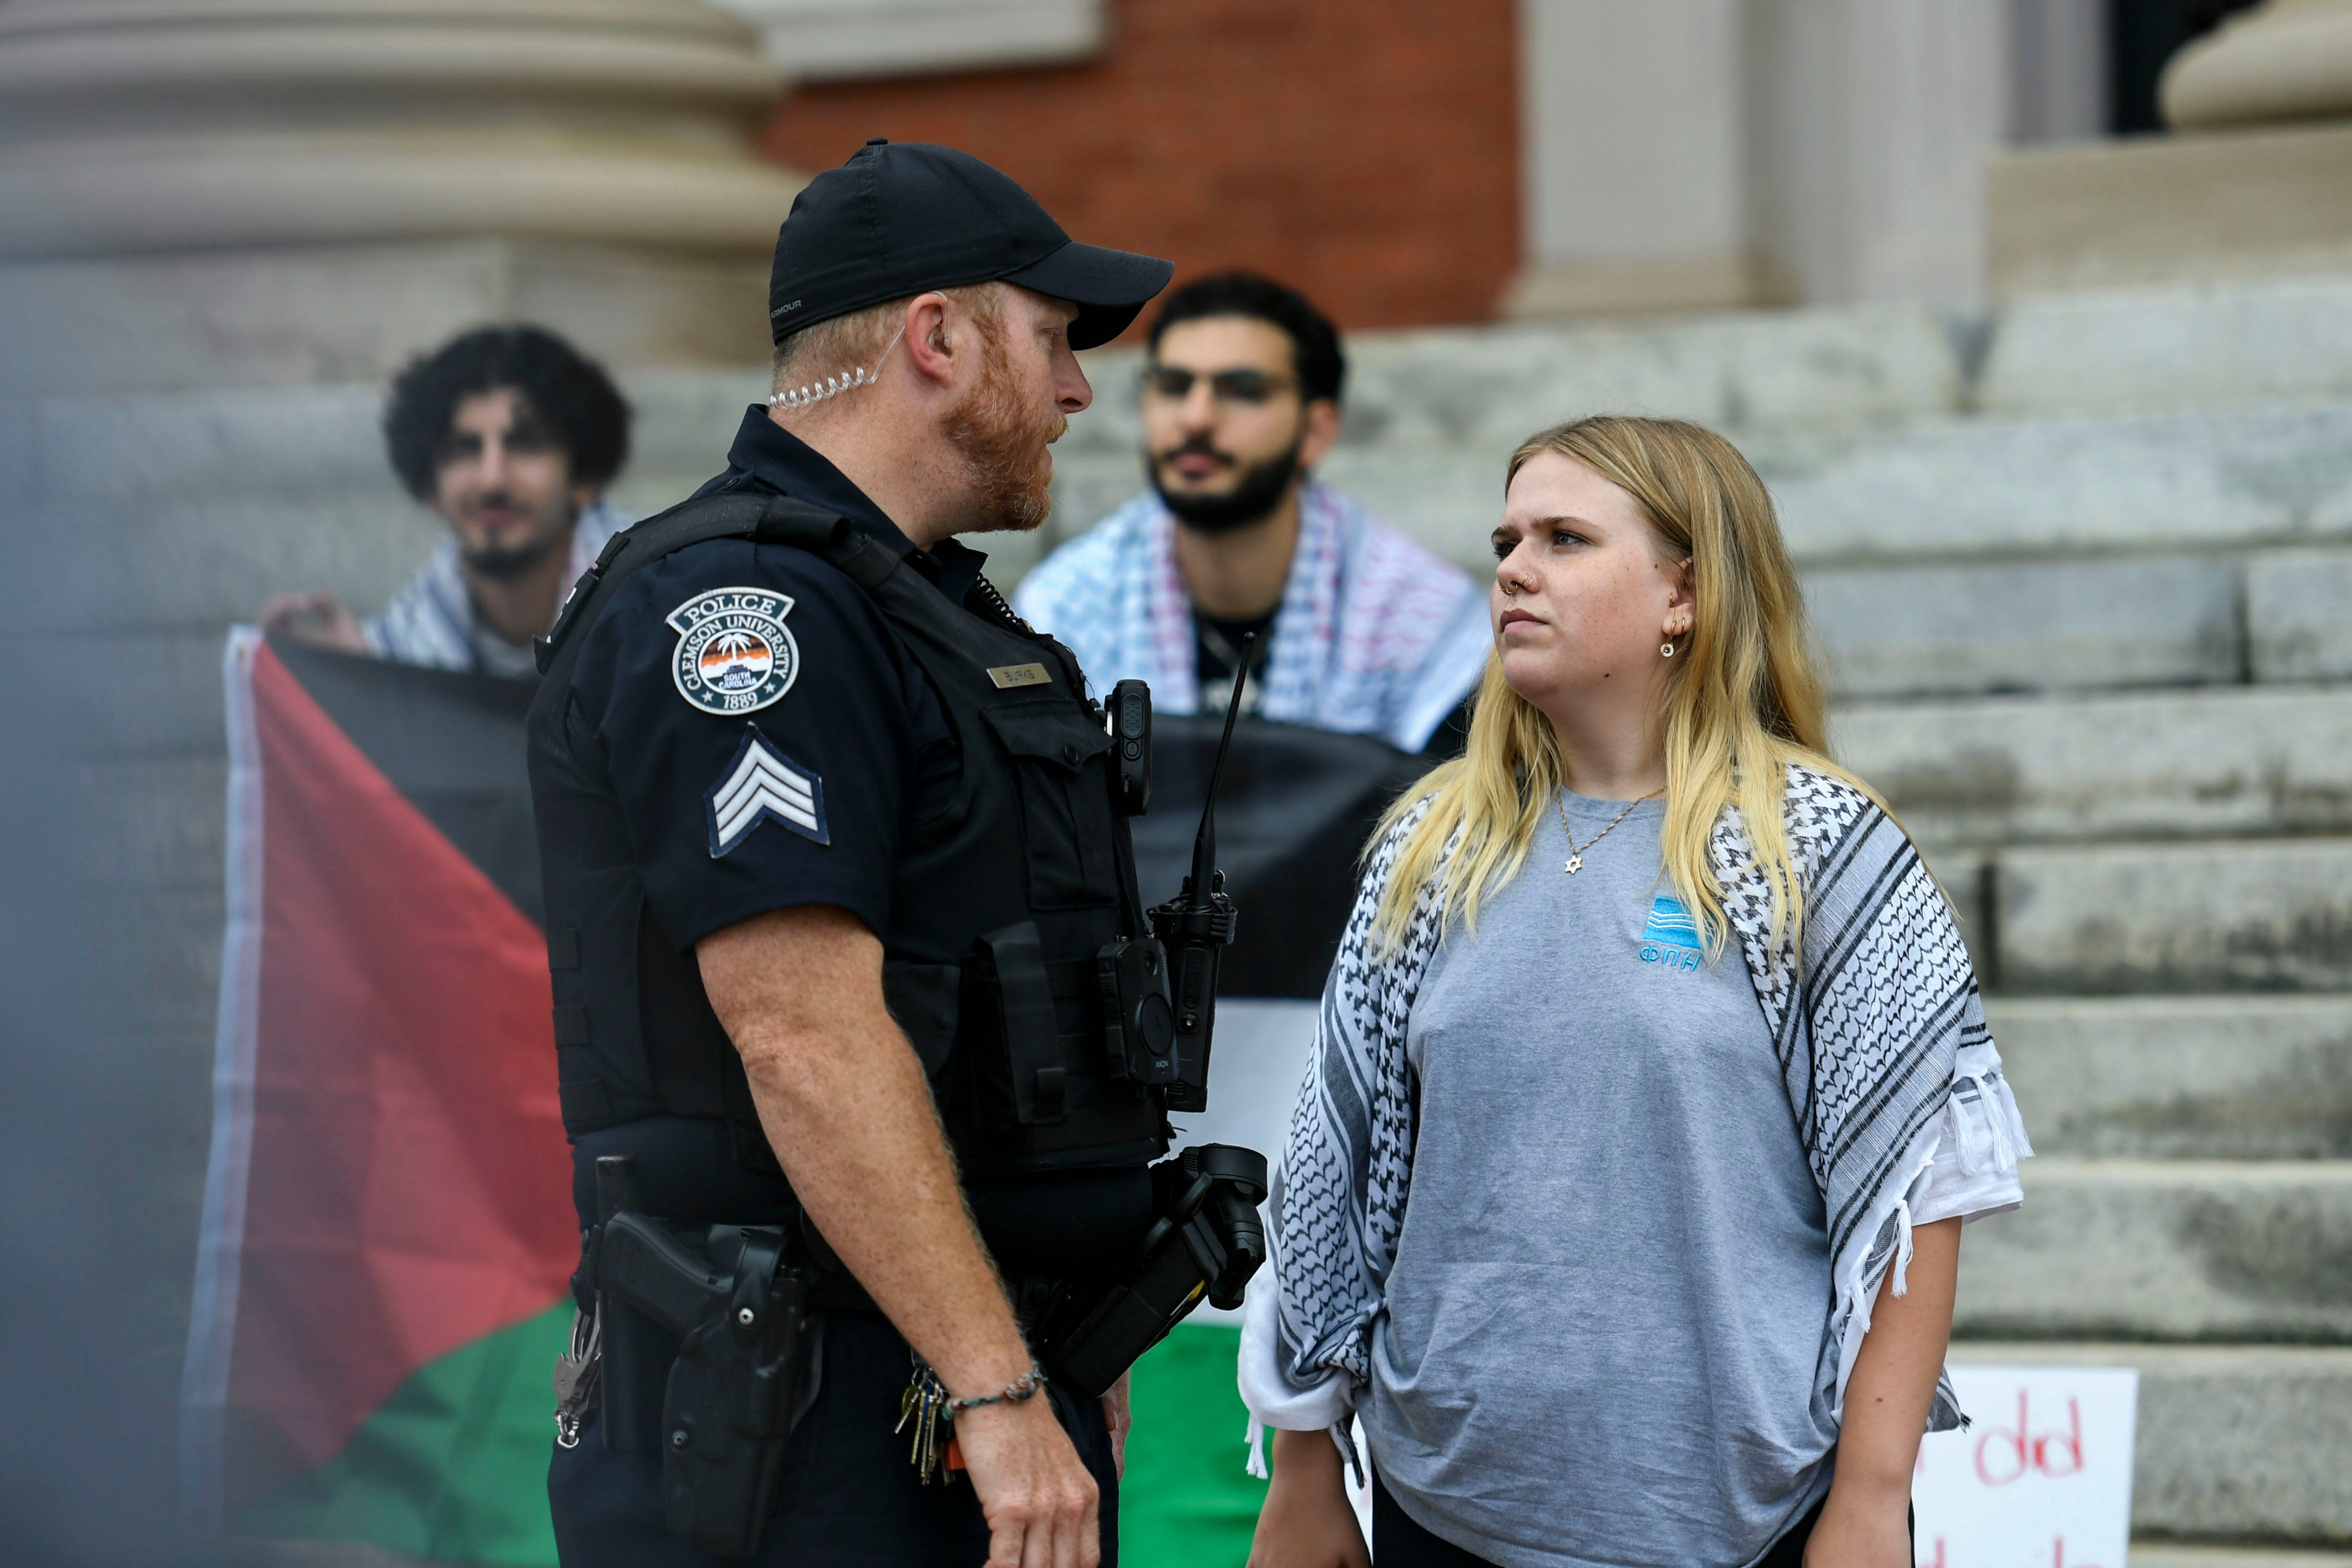 'You support genocide': Clemson University students hold protest against stance on Israel